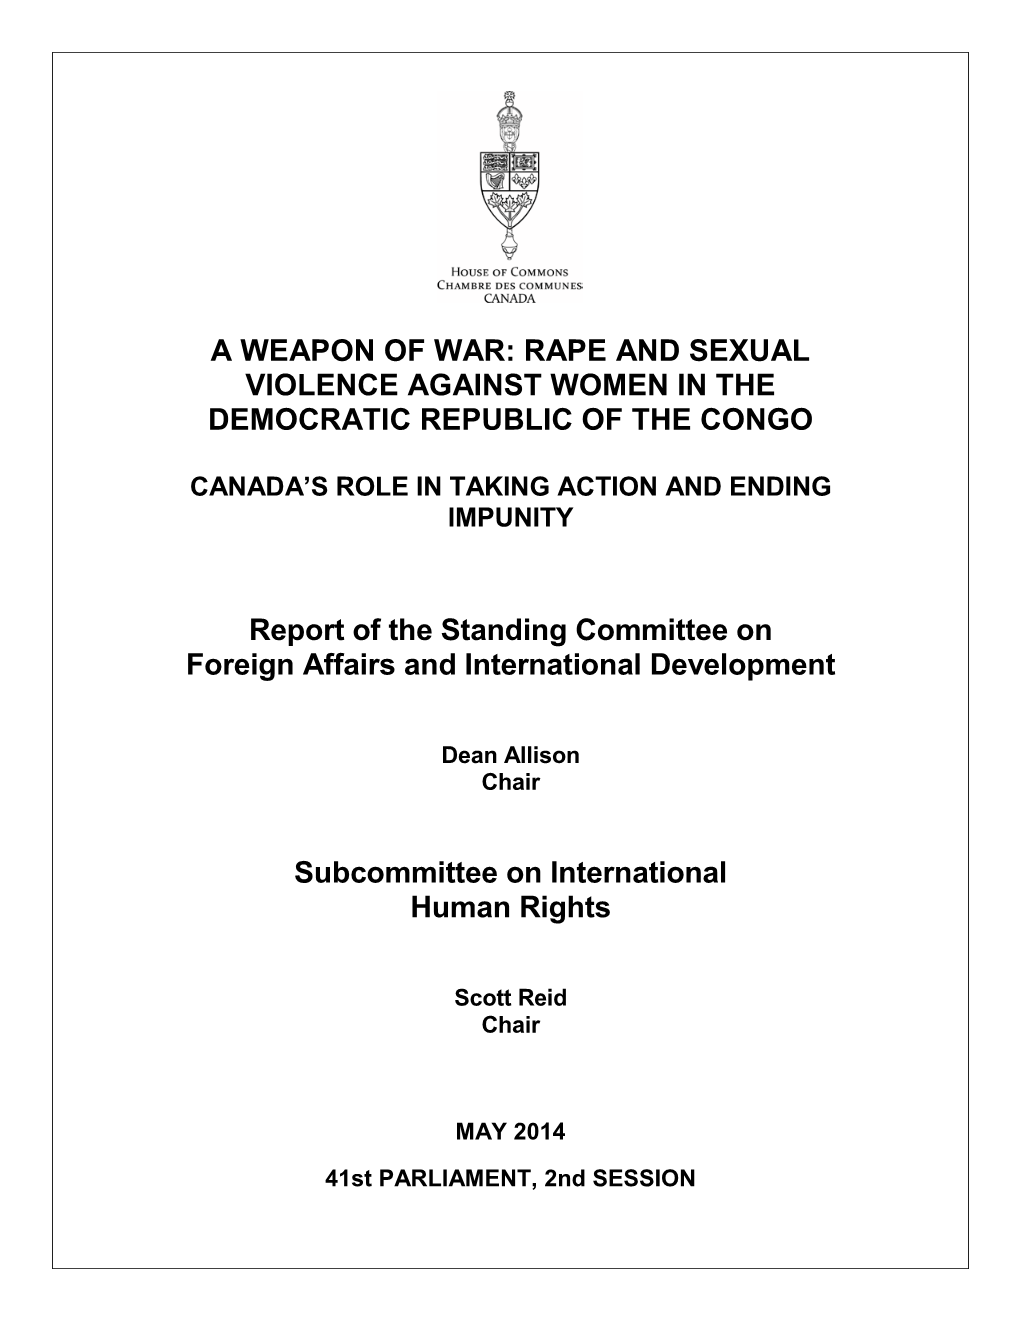 Rape and Sexual Violence Against Women in the Democratic Republic of Congo